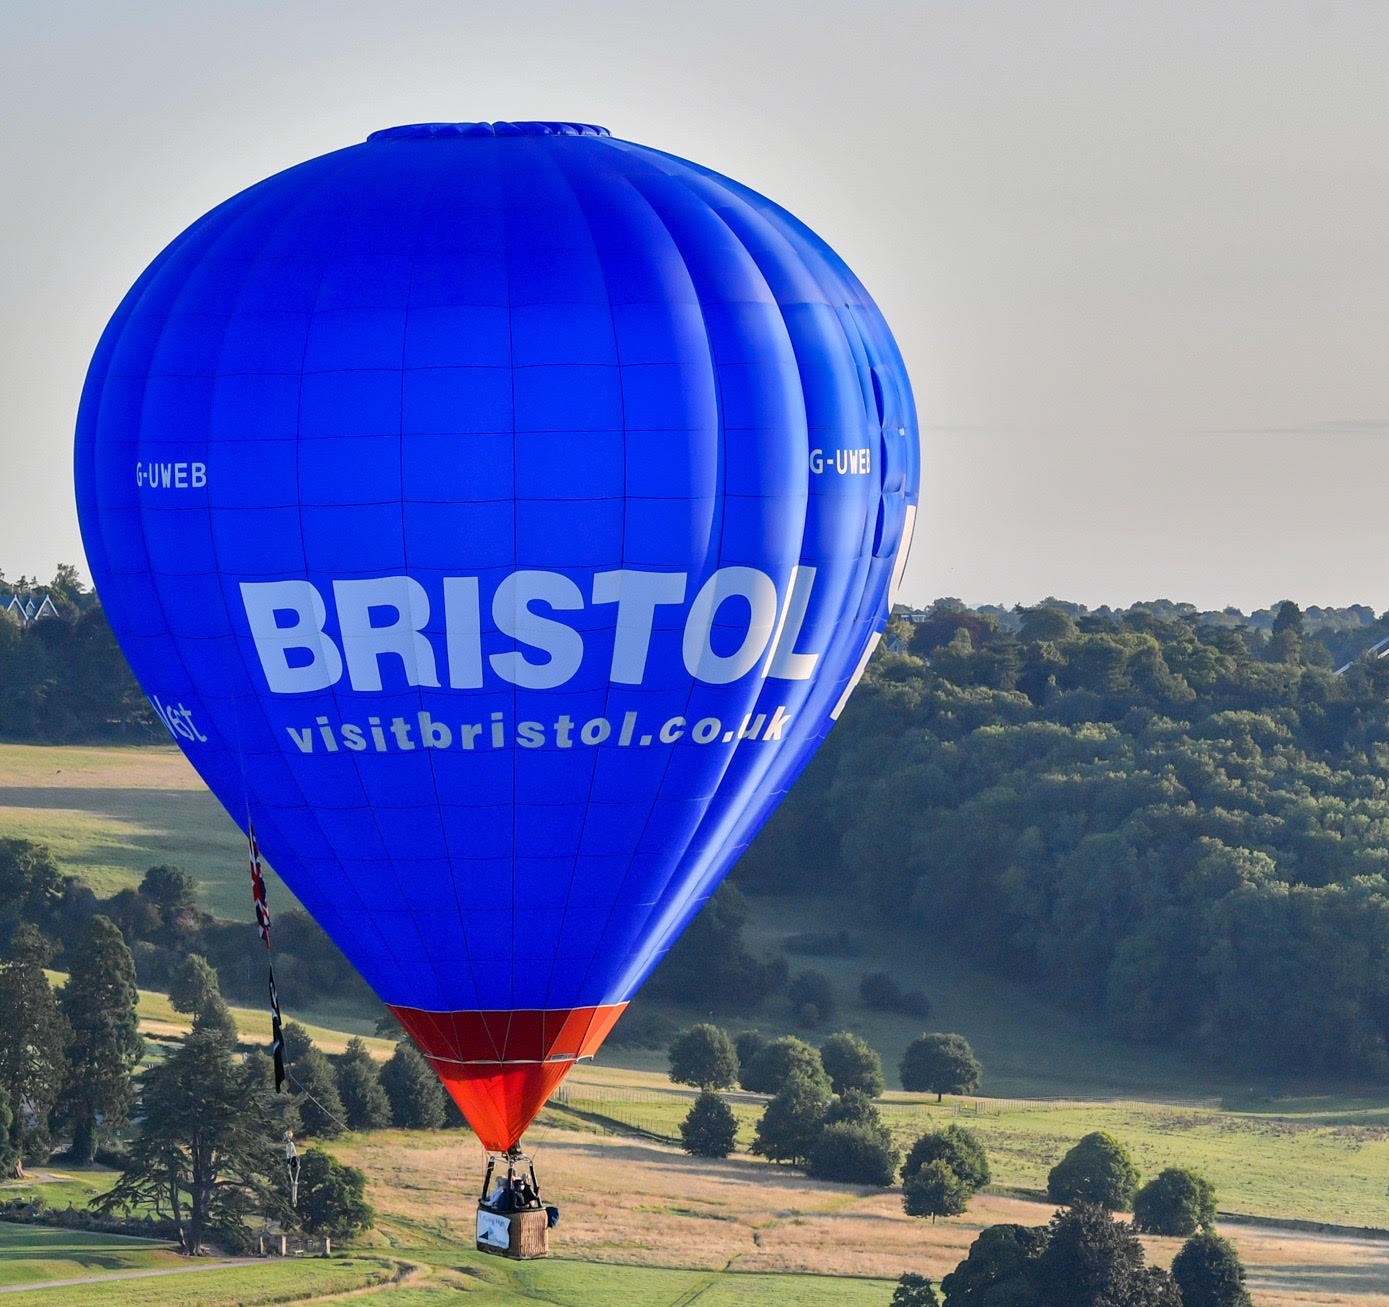 Local Balloon Pilots rally round to support Key Workers and Carers